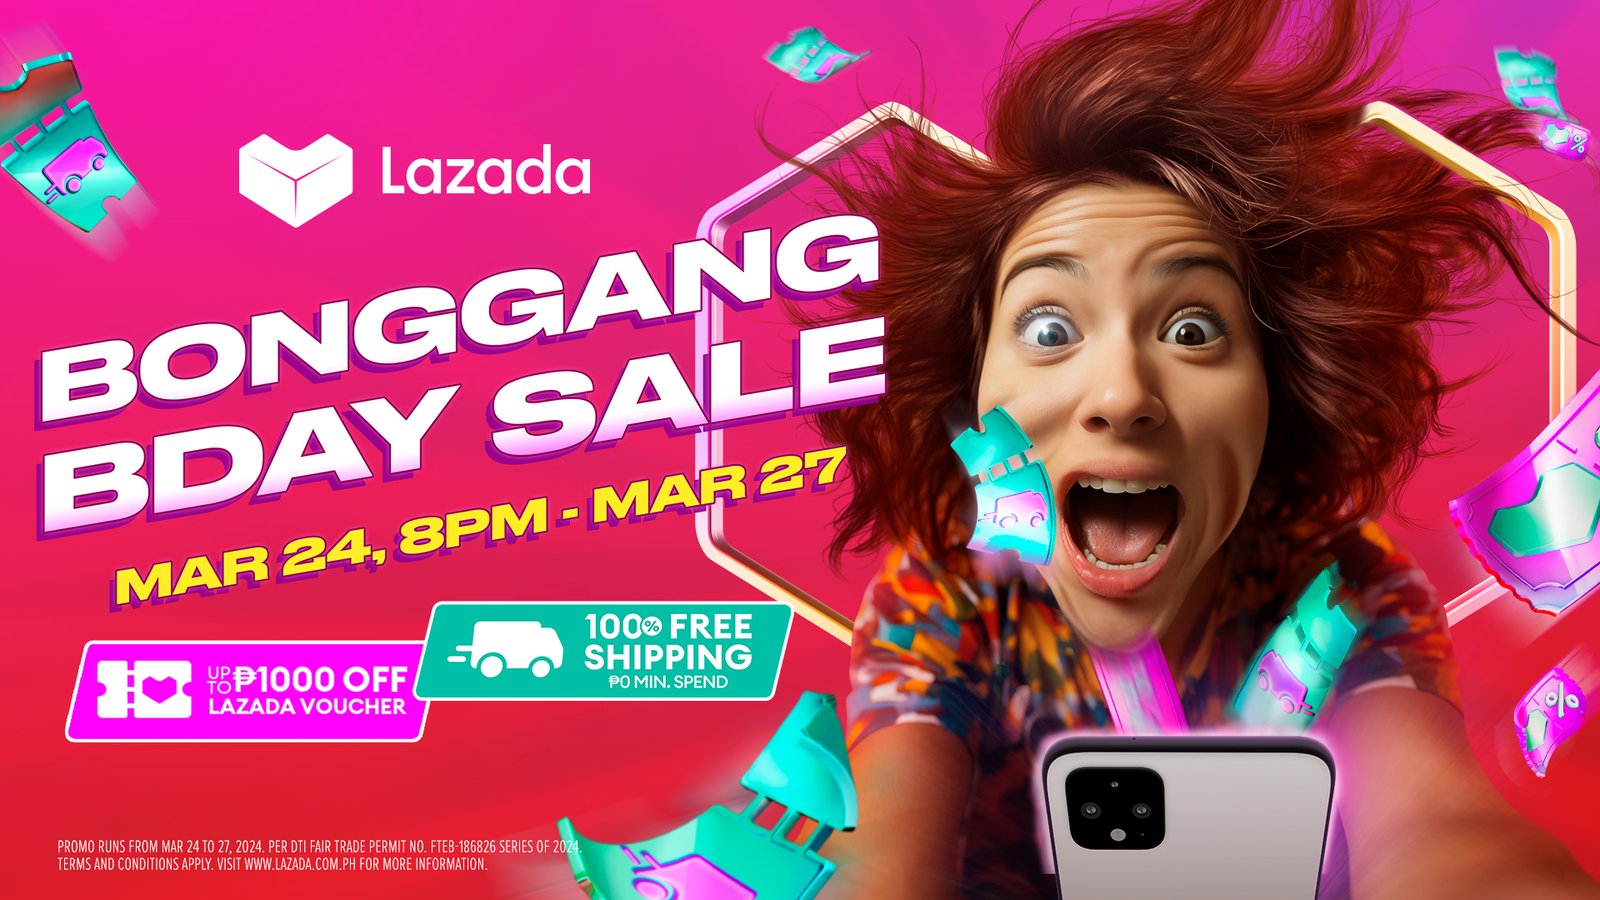 P1000 Vouchers and 100% Free Shipping Await at Lazada’s Bonggang Birthday Sale from March 24 (8PM)-March 27!